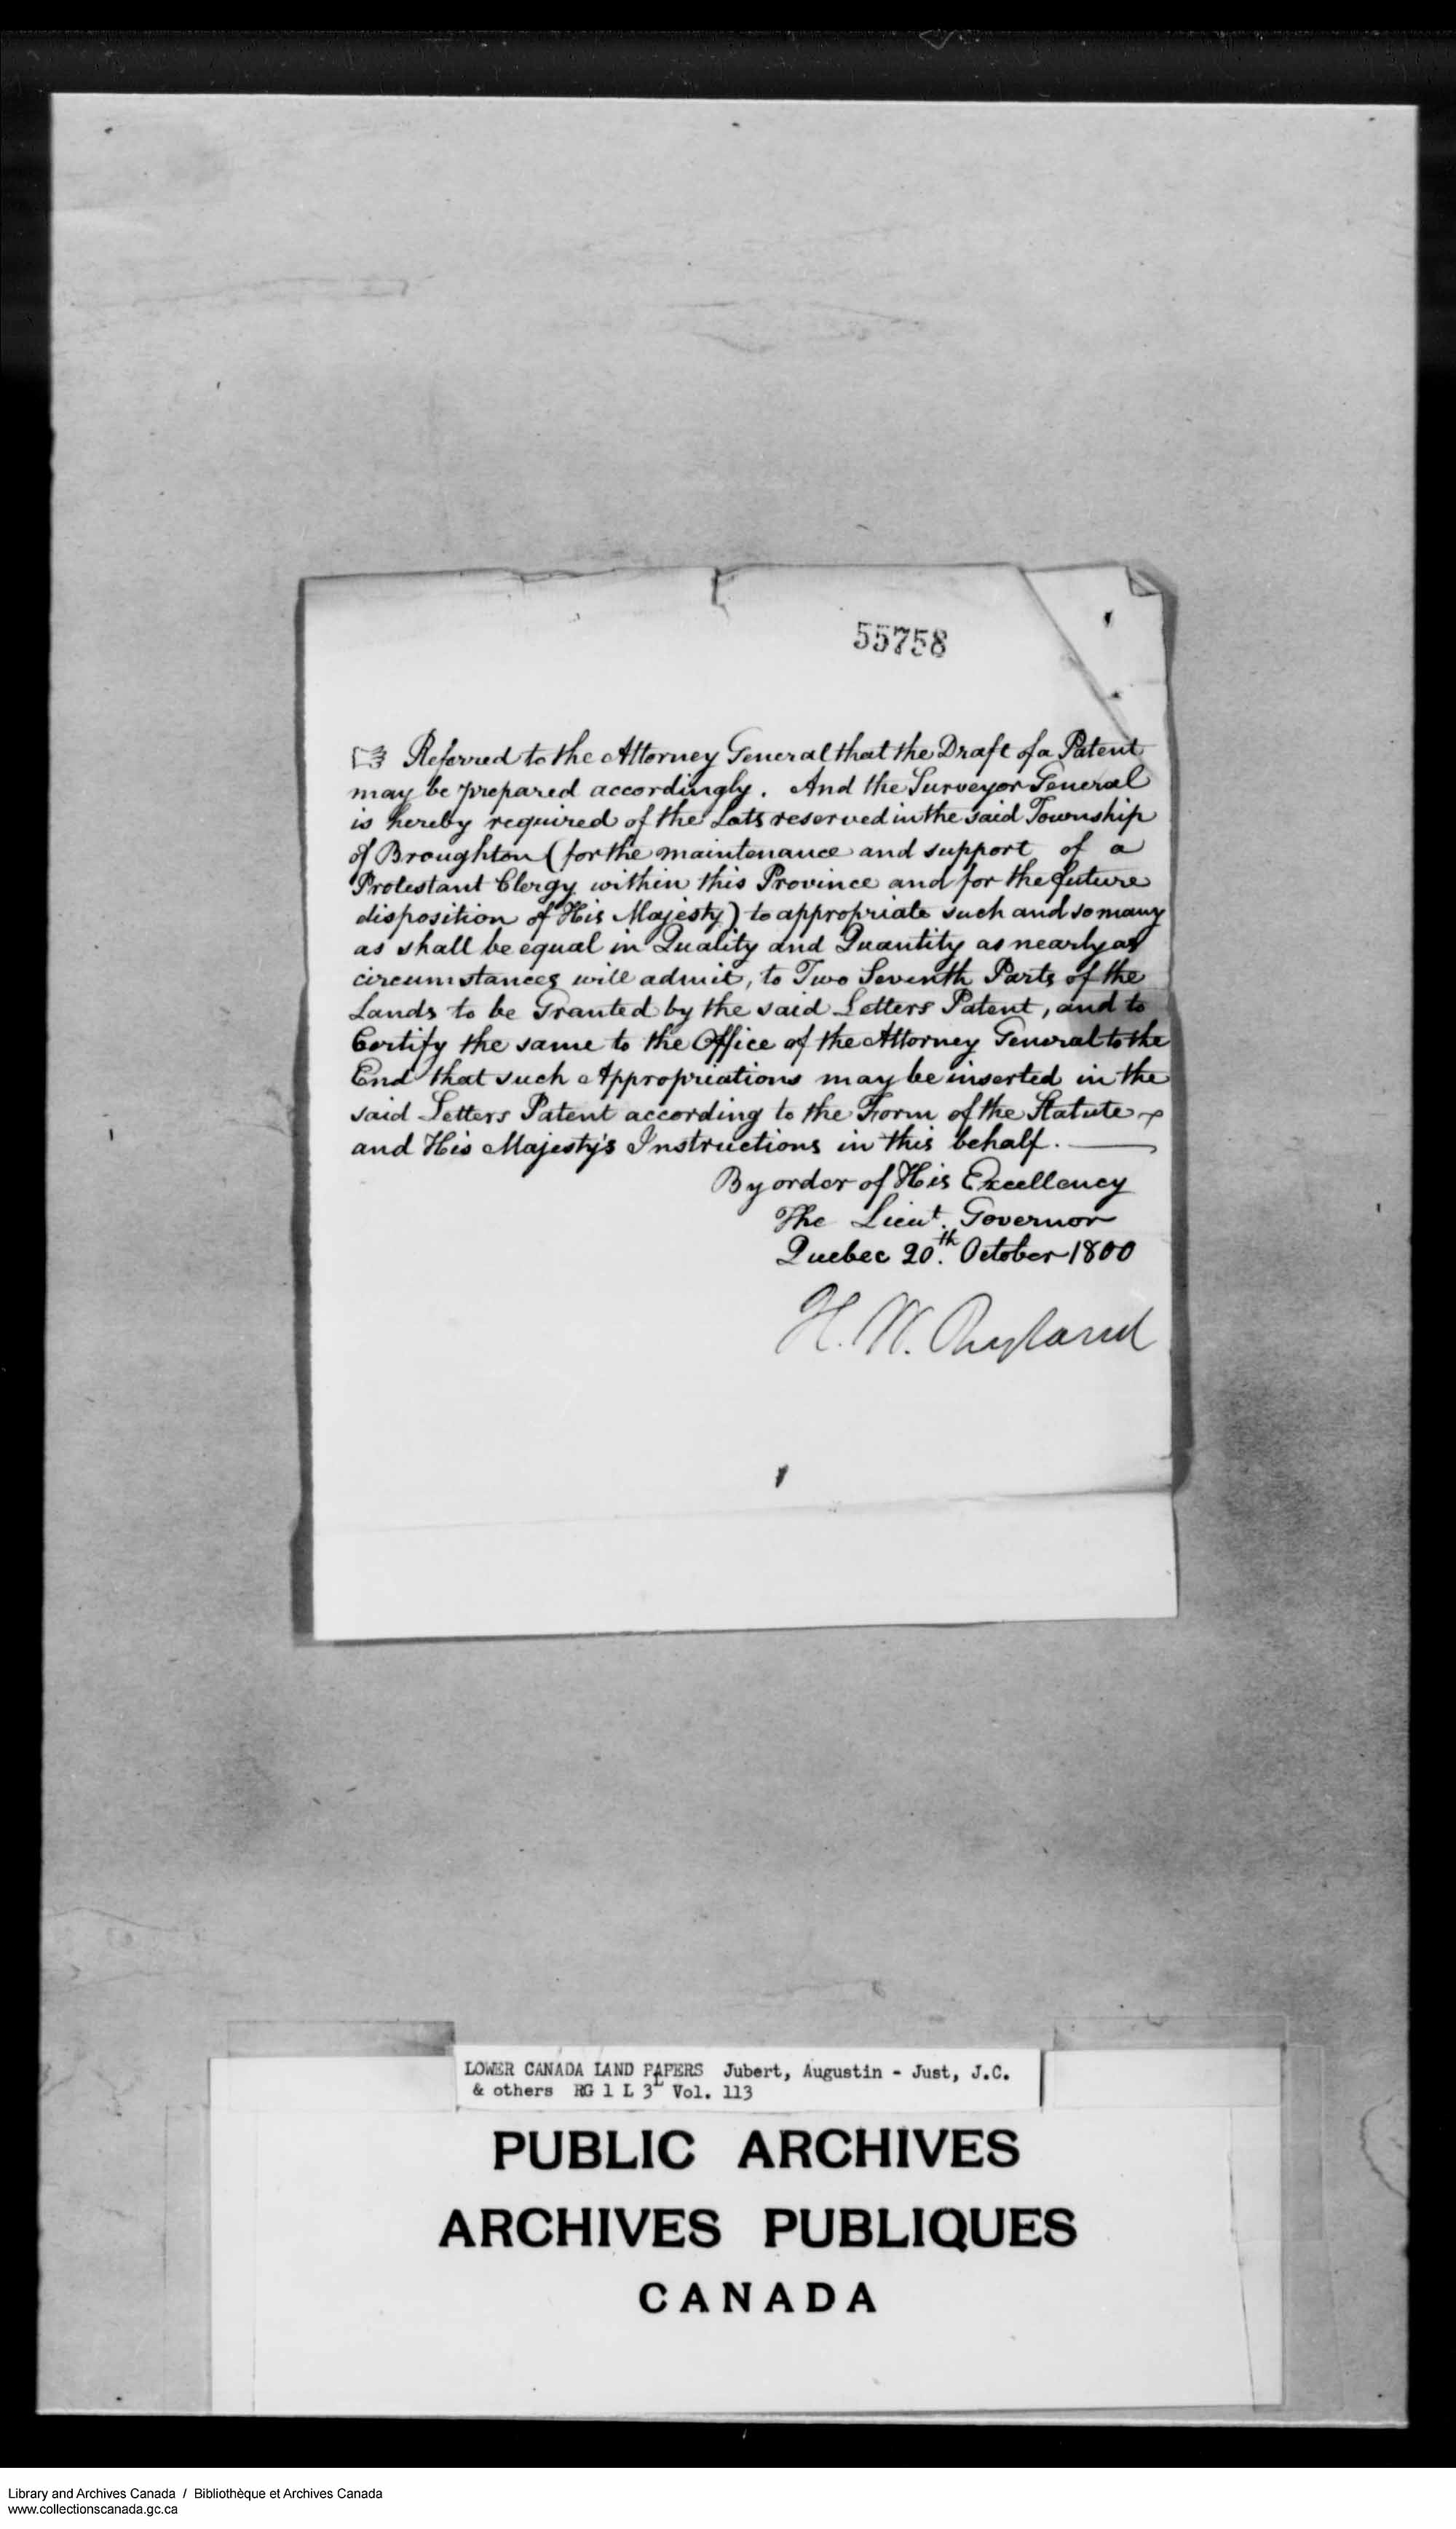 Digitized page of  for Image No.: e008700246